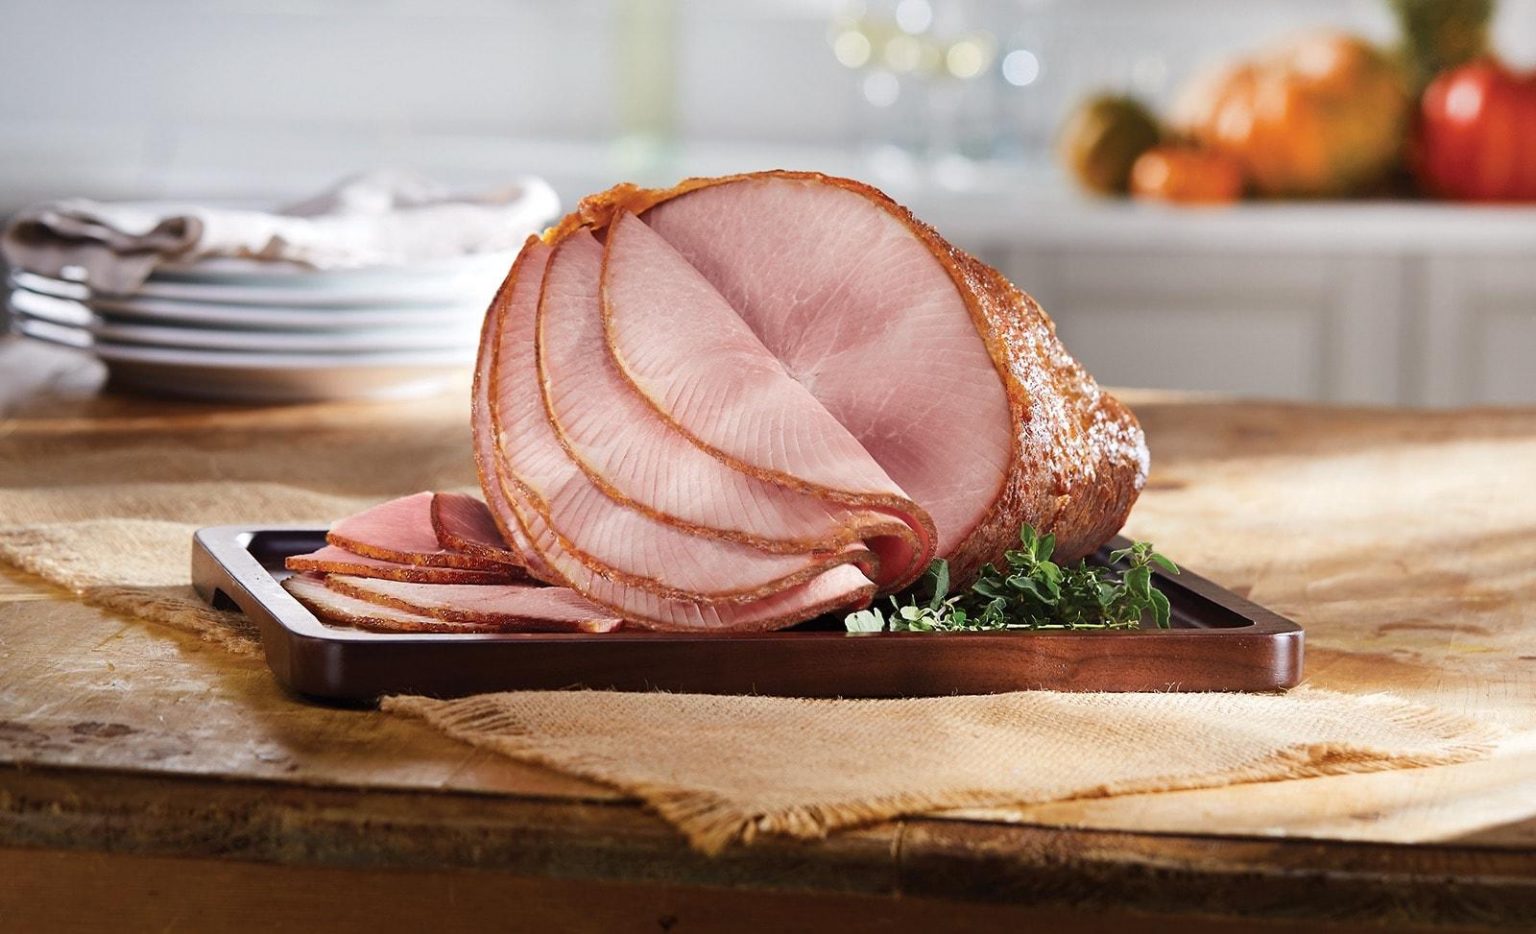 Buy 1, Get 1 FREE Honey Baked Ham Slices by the Pound.